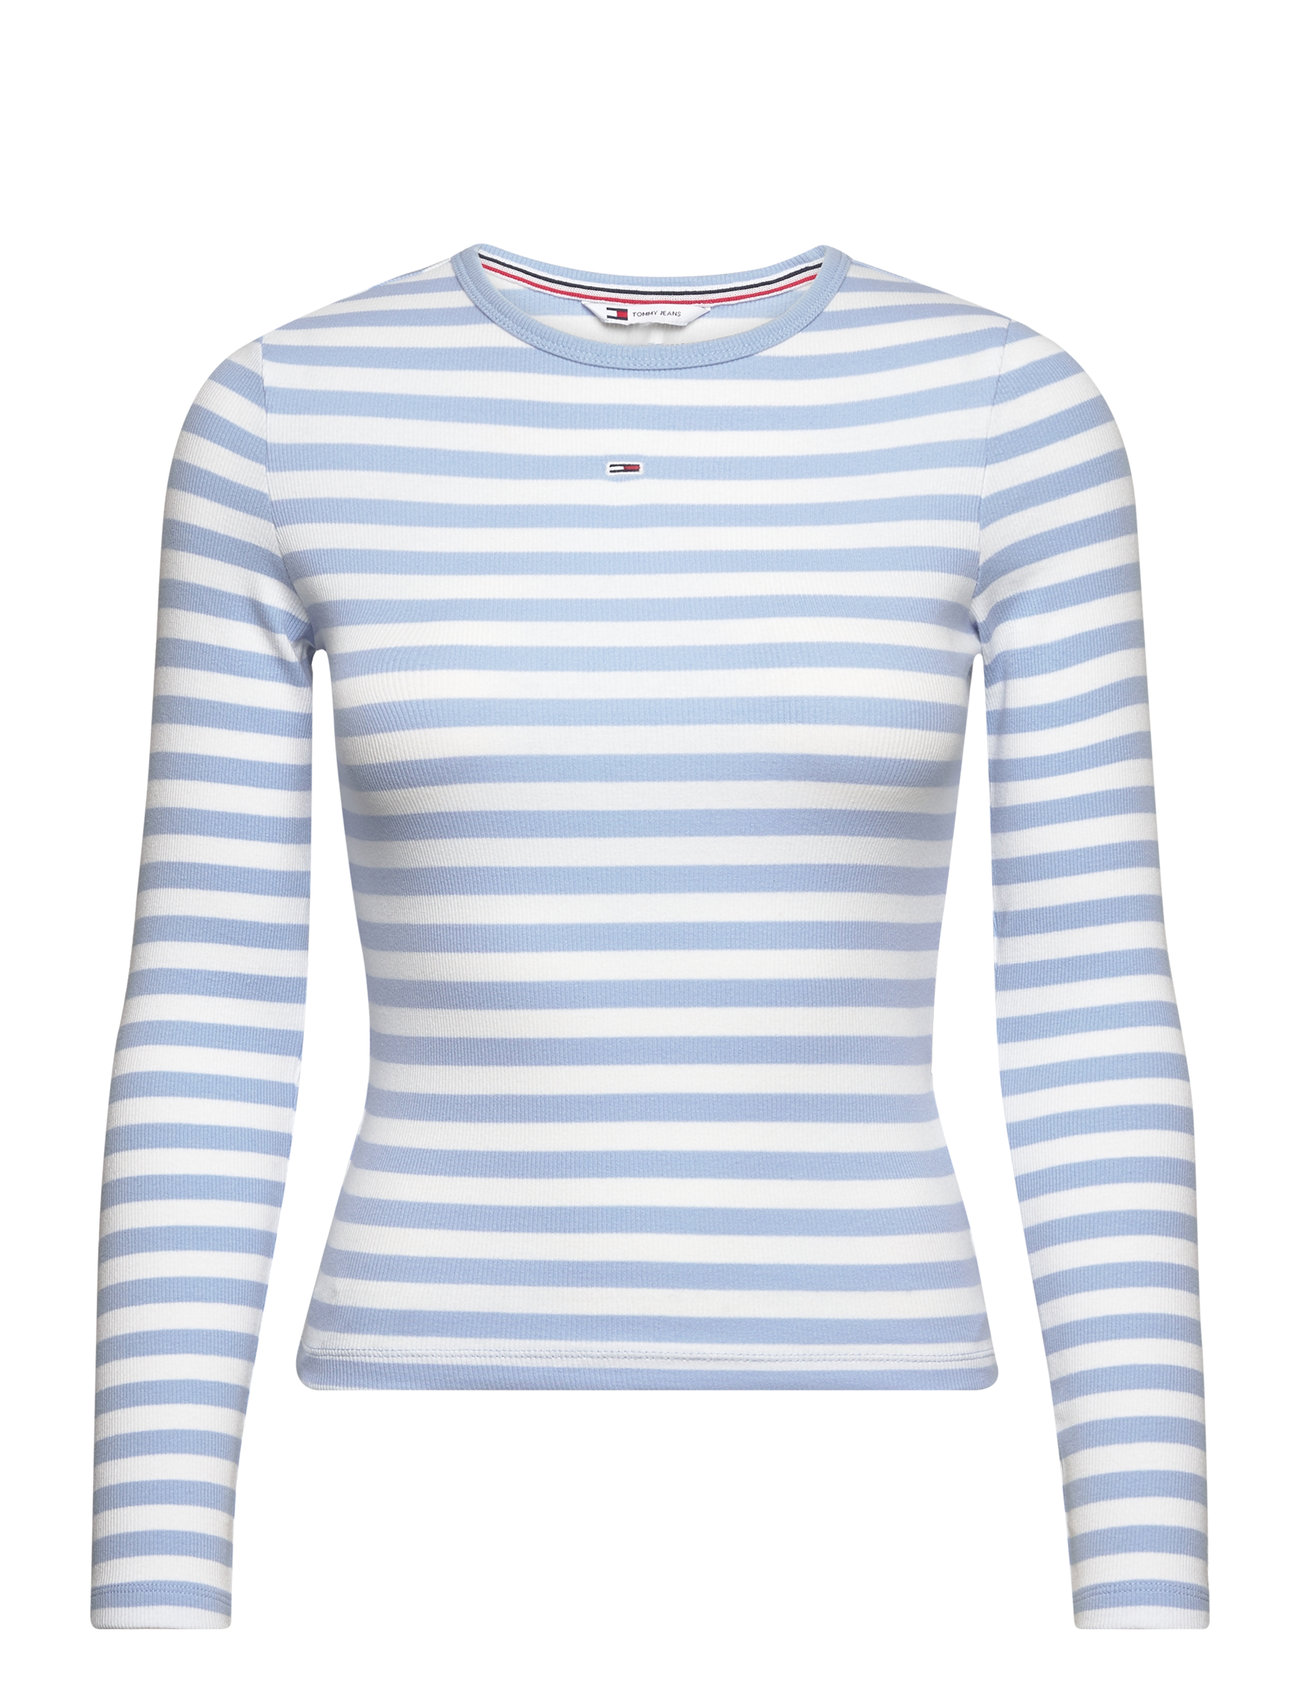 Tjw Essential Rib Stripe Top Ls Tops T-shirts & Tops Long-sleeved Blue Tommy Jeans